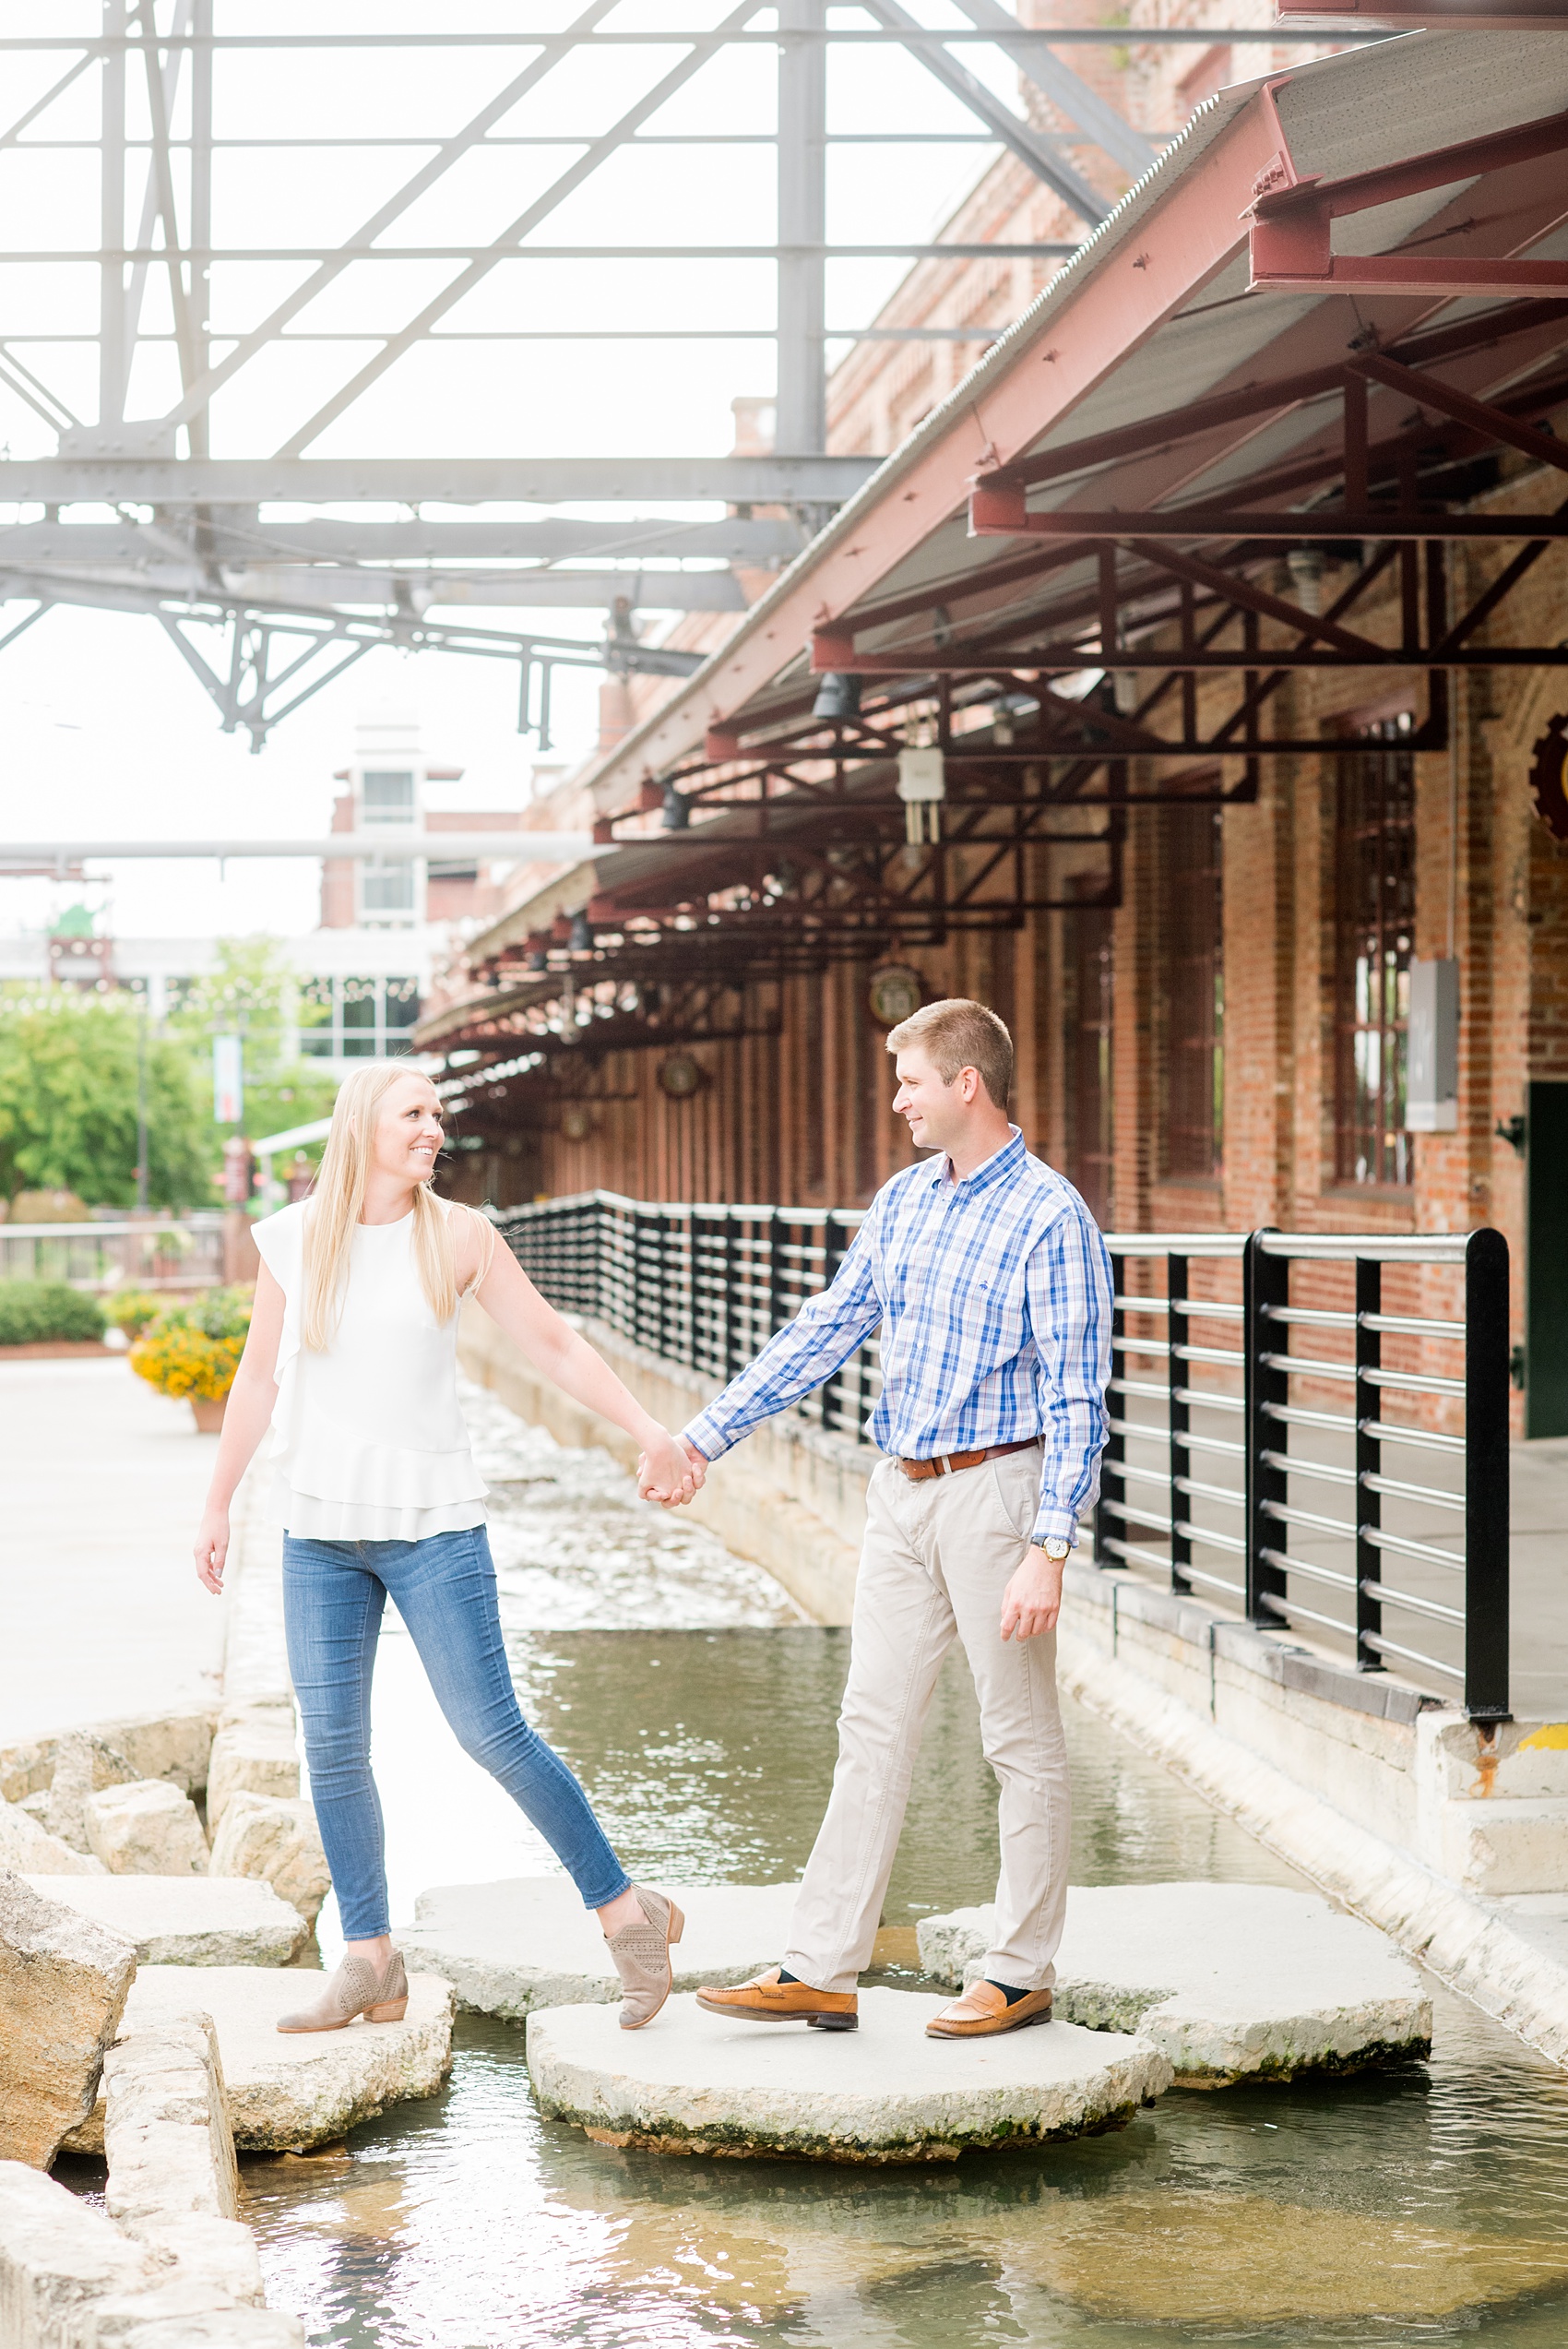 Mikkel Paige Photography images from an engagement session at Durham's American Tobacco Campus in North Carolina.